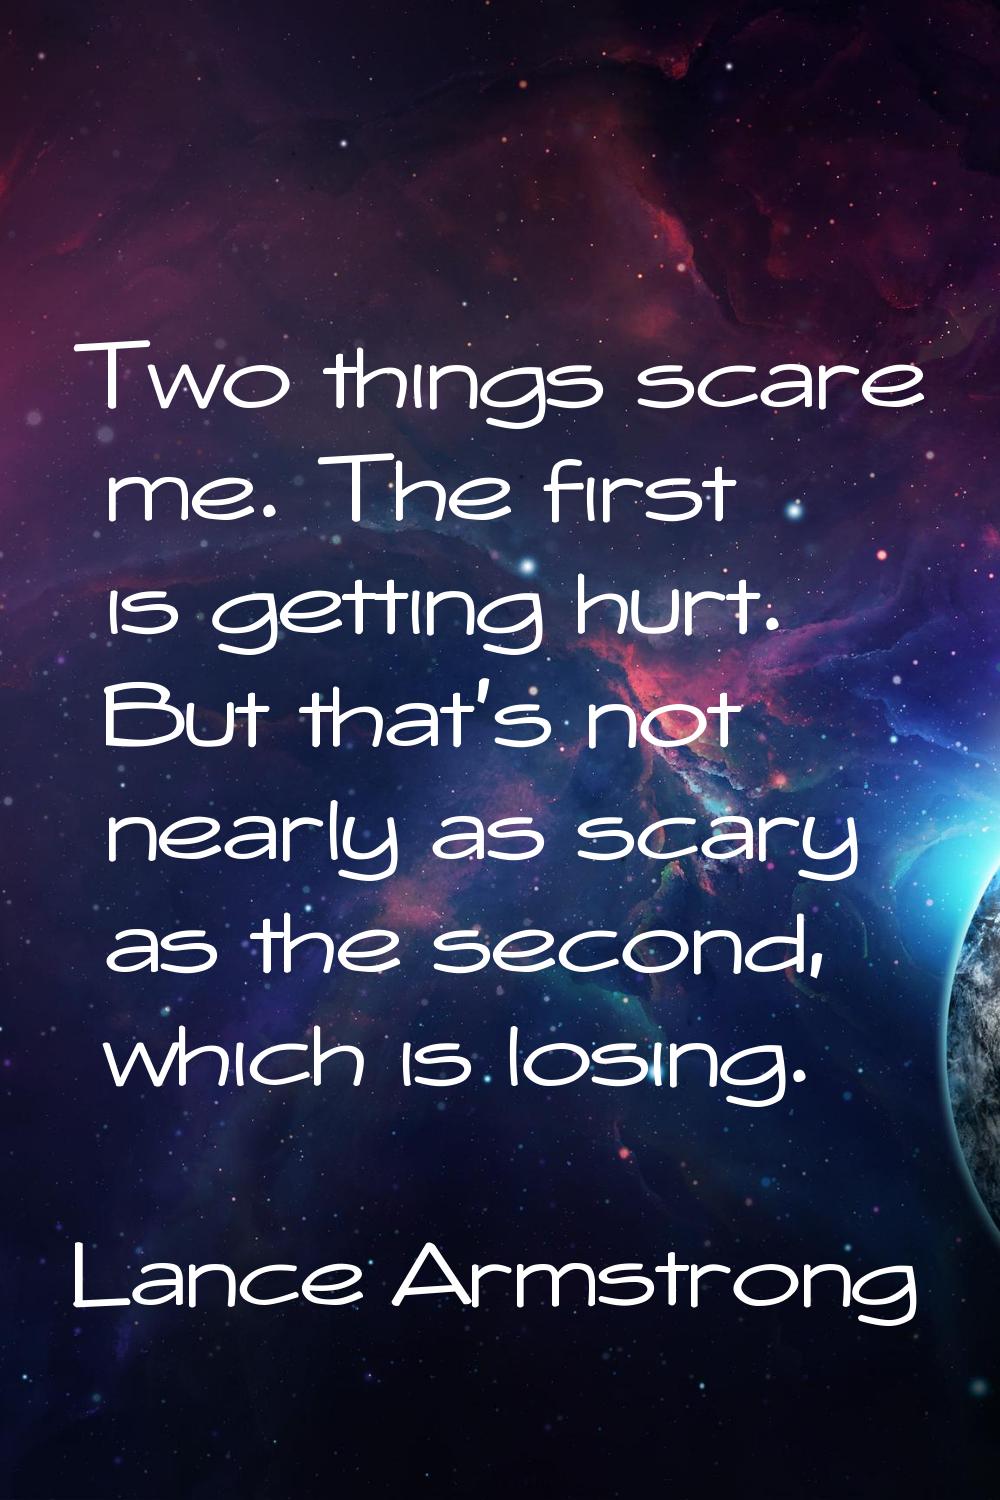 Two things scare me. The first is getting hurt. But that's not nearly as scary as the second, which